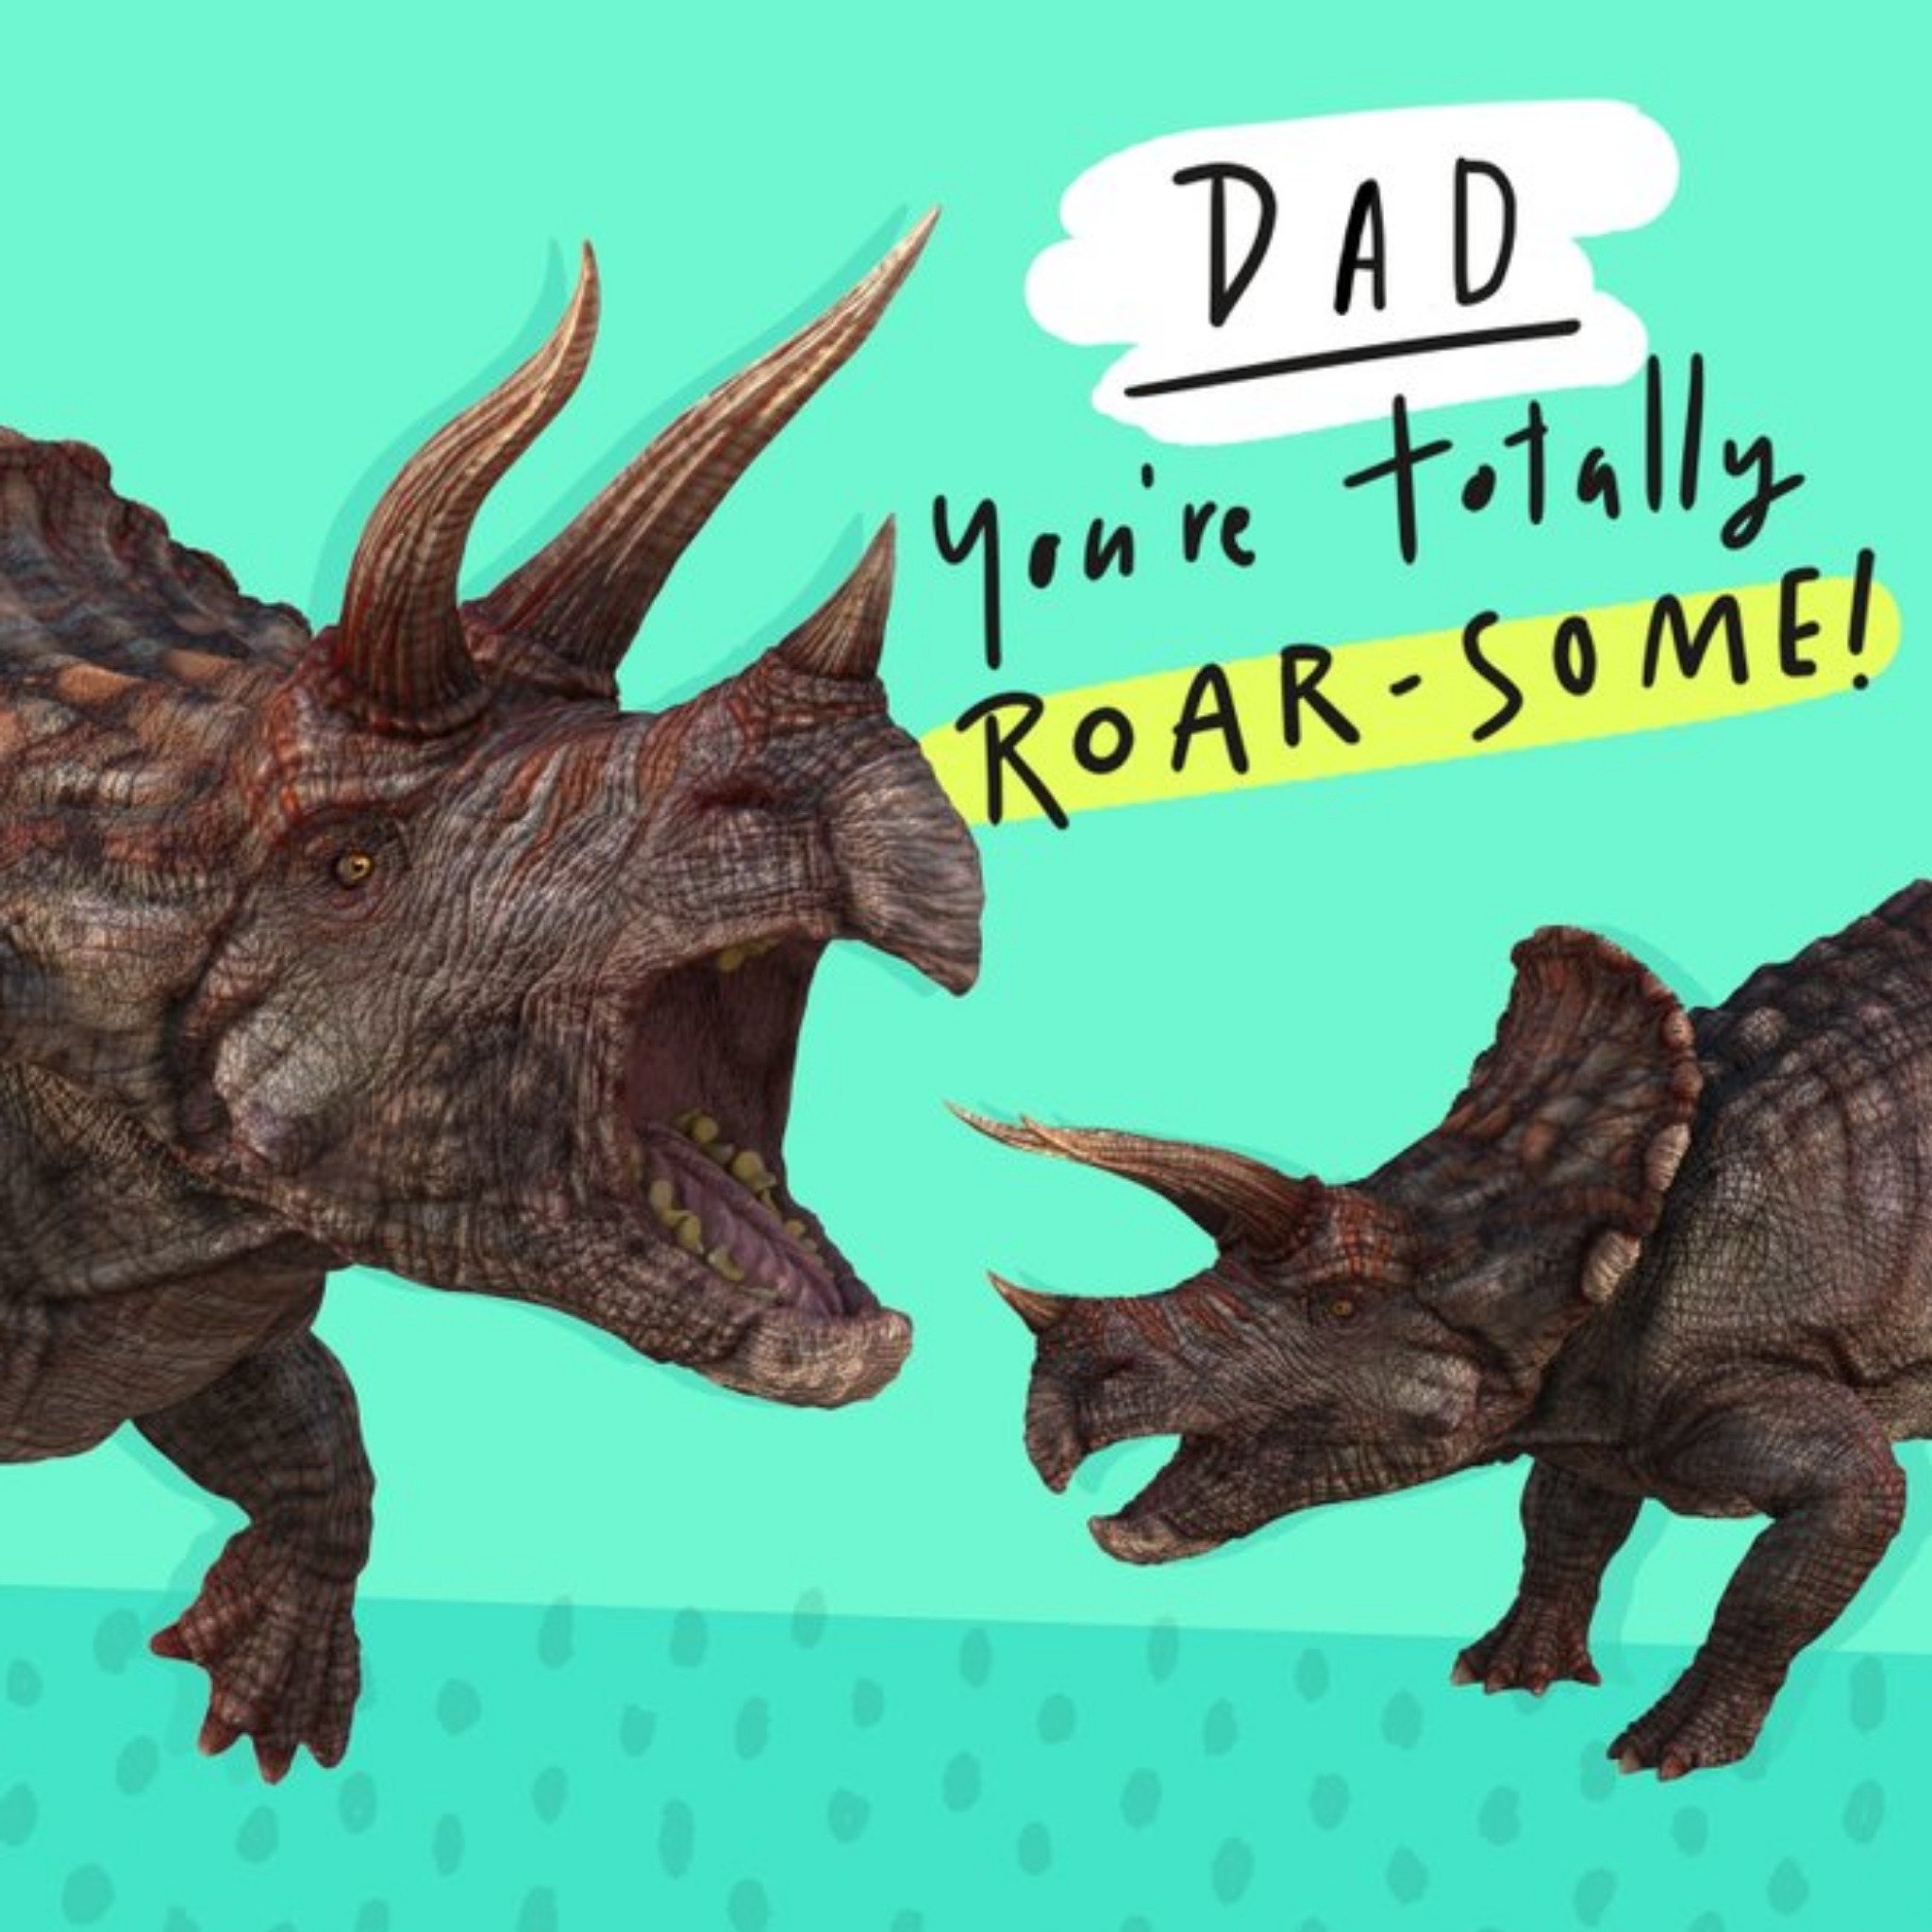 The Natural History Museum Totally Roar-Some Father's Day Card, Large